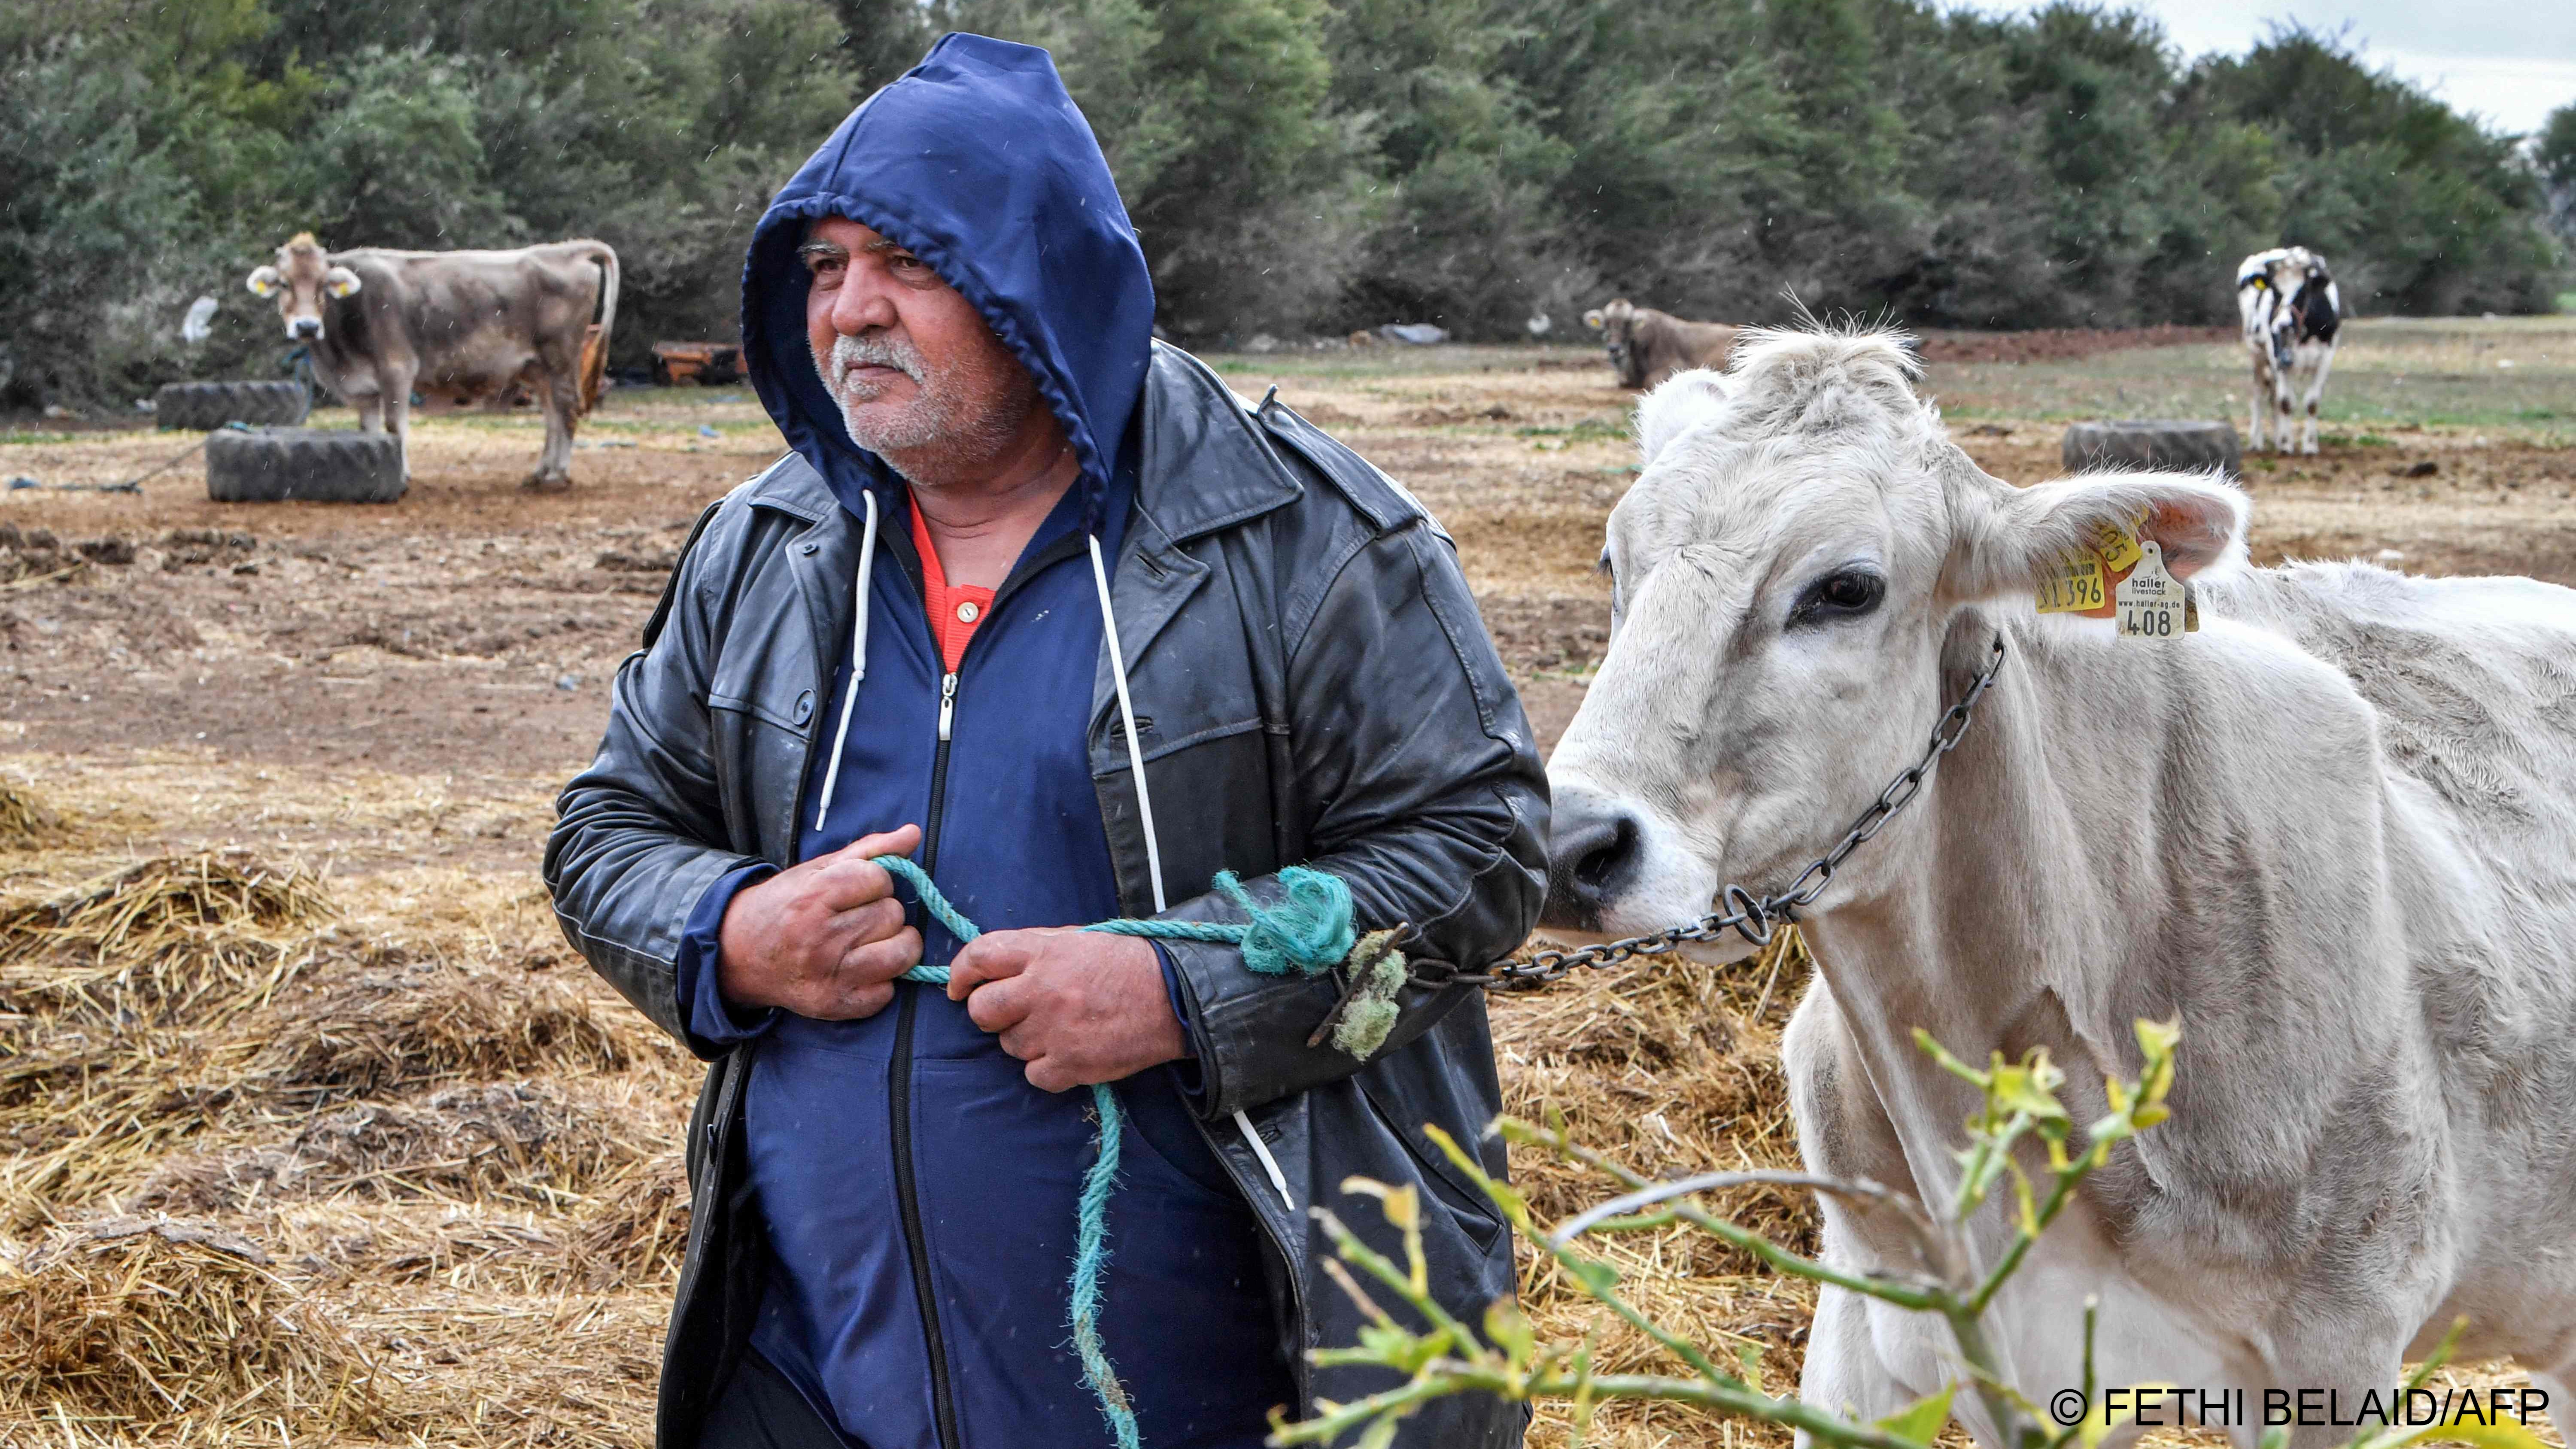 Farmer Mohamed Gharsallaoui leads a cow at his small farm in the town of el-Batten, about 35 kilometres west of Tunisia‘s capital, on 20 January 2023 (image: FETHI BELAID/AFP)